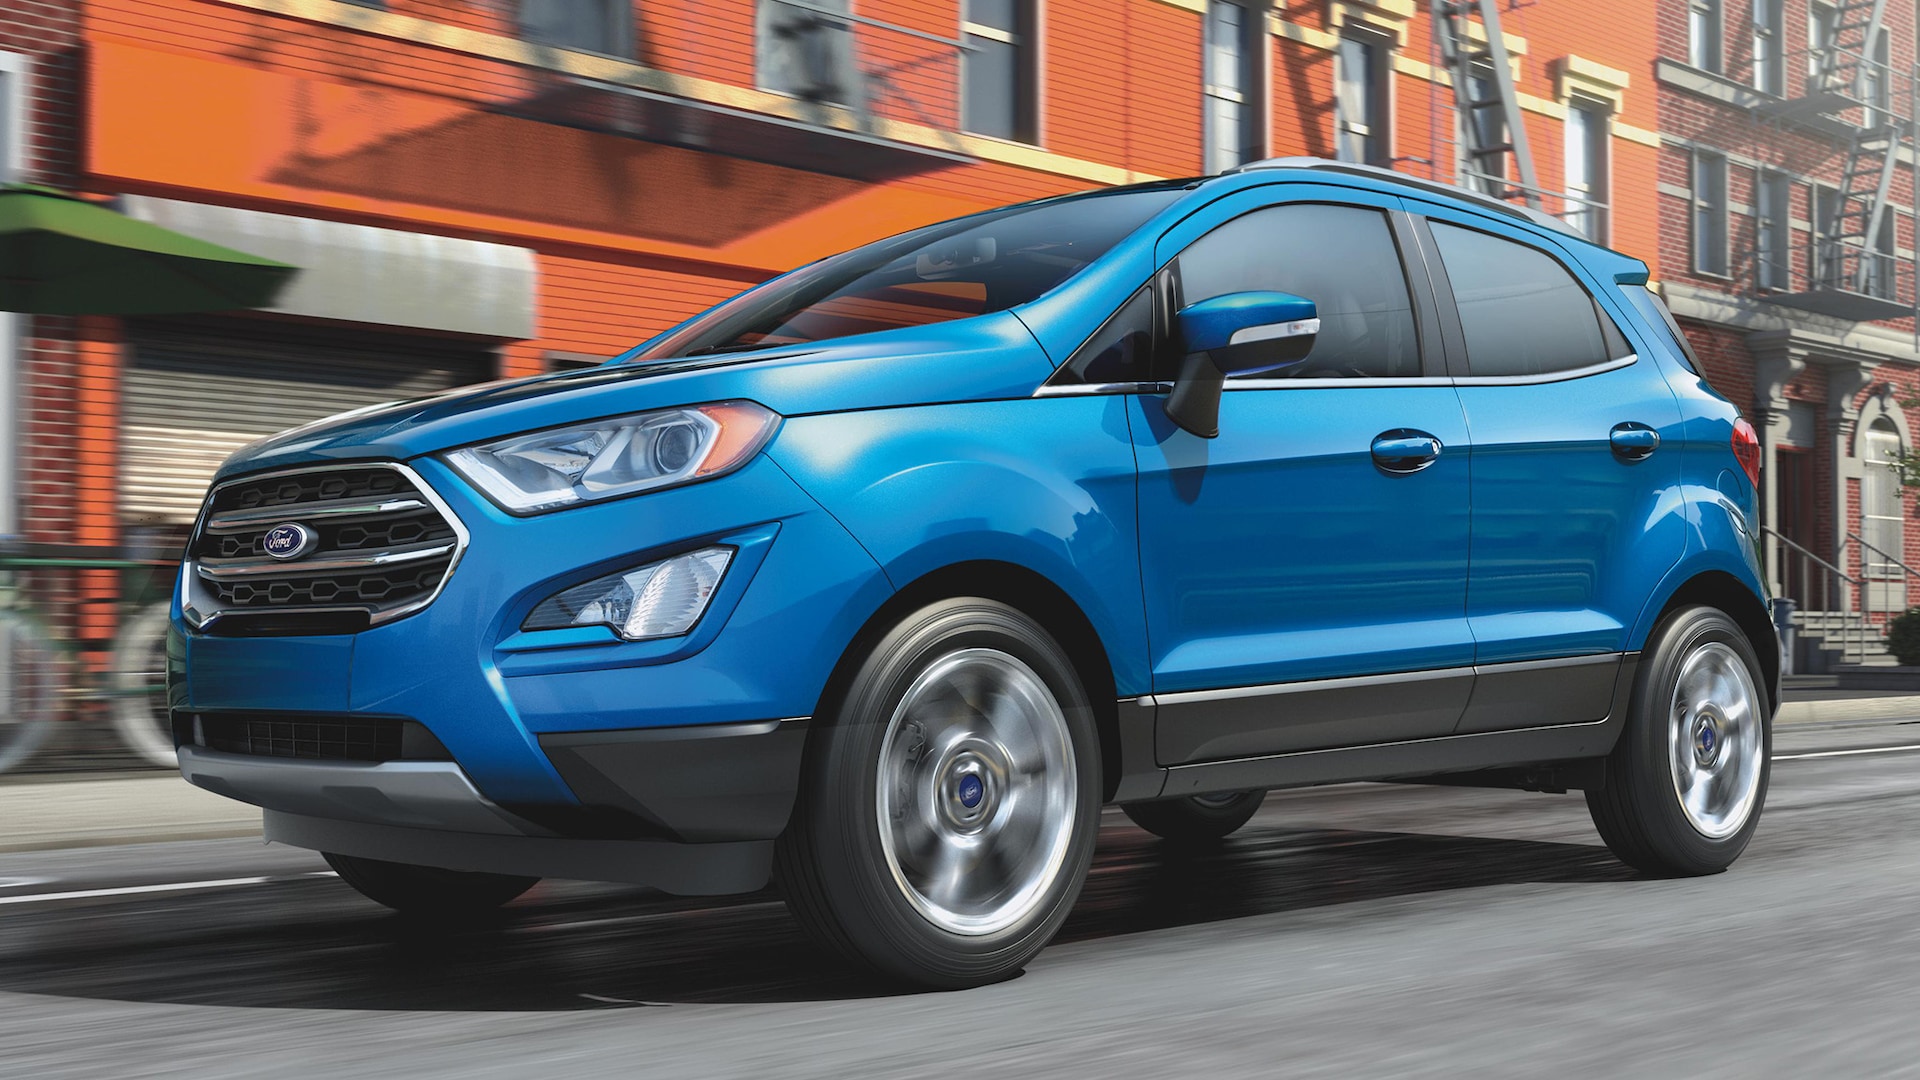 2021 Ford EcoSport Prices, Reviews, and Photos - MotorTrend